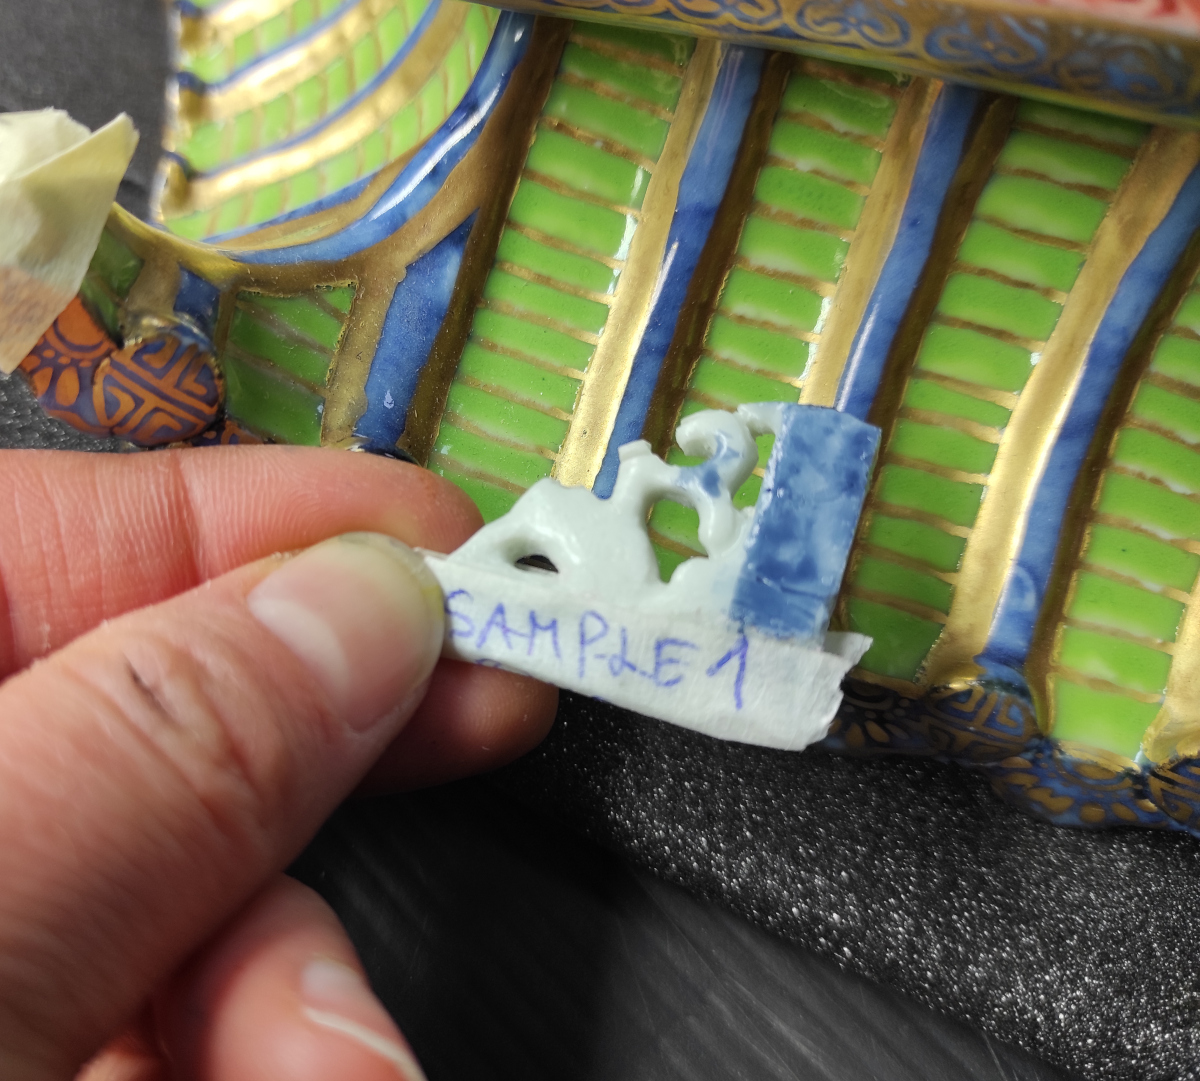 Test sample of blue colour on Hxtal epoxy resin reconstruction. a small piece of painted resin is held against the pagoda.